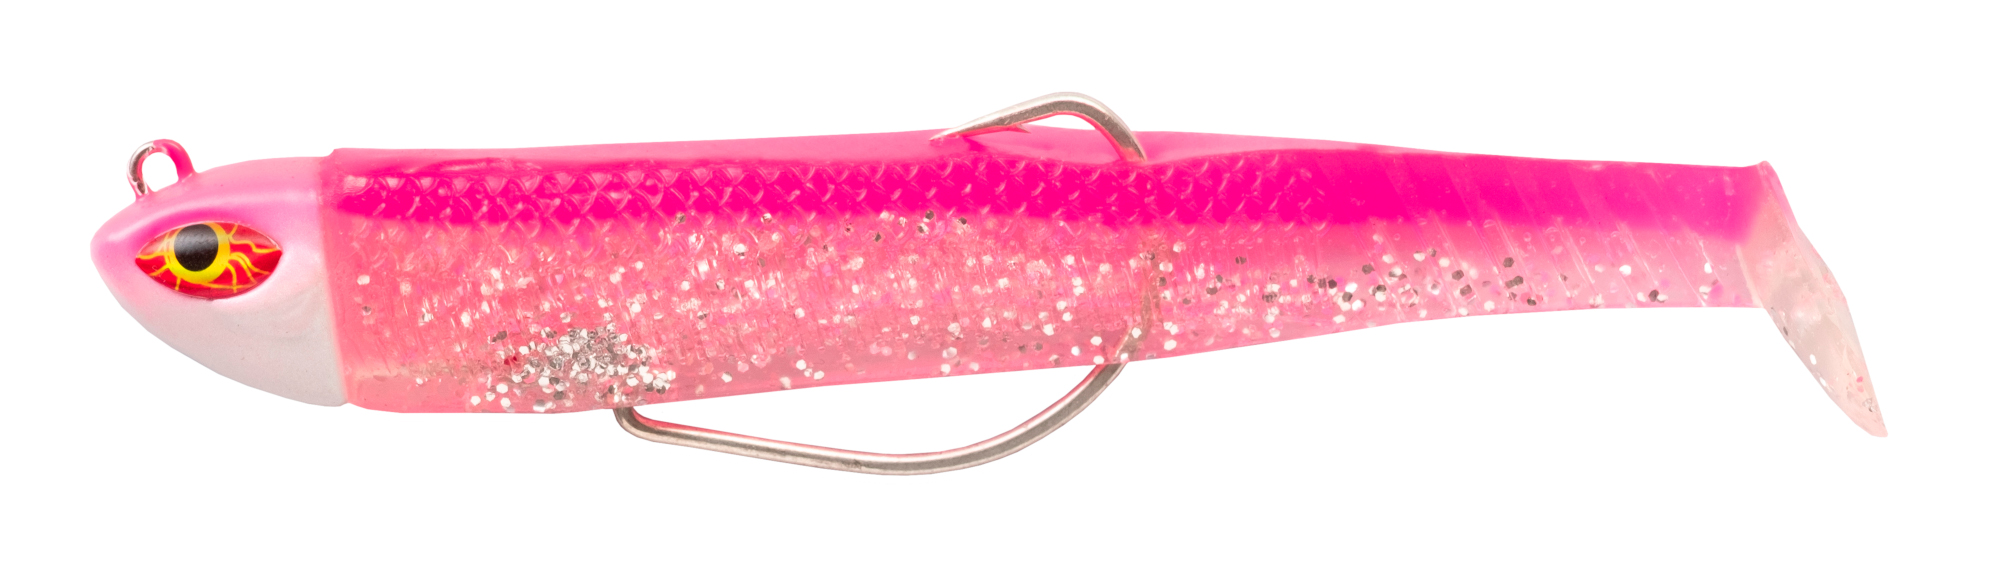 Cinnetic Crafty Candy Shad 10.5cm (25g) (2 pcs) - Electric Pink